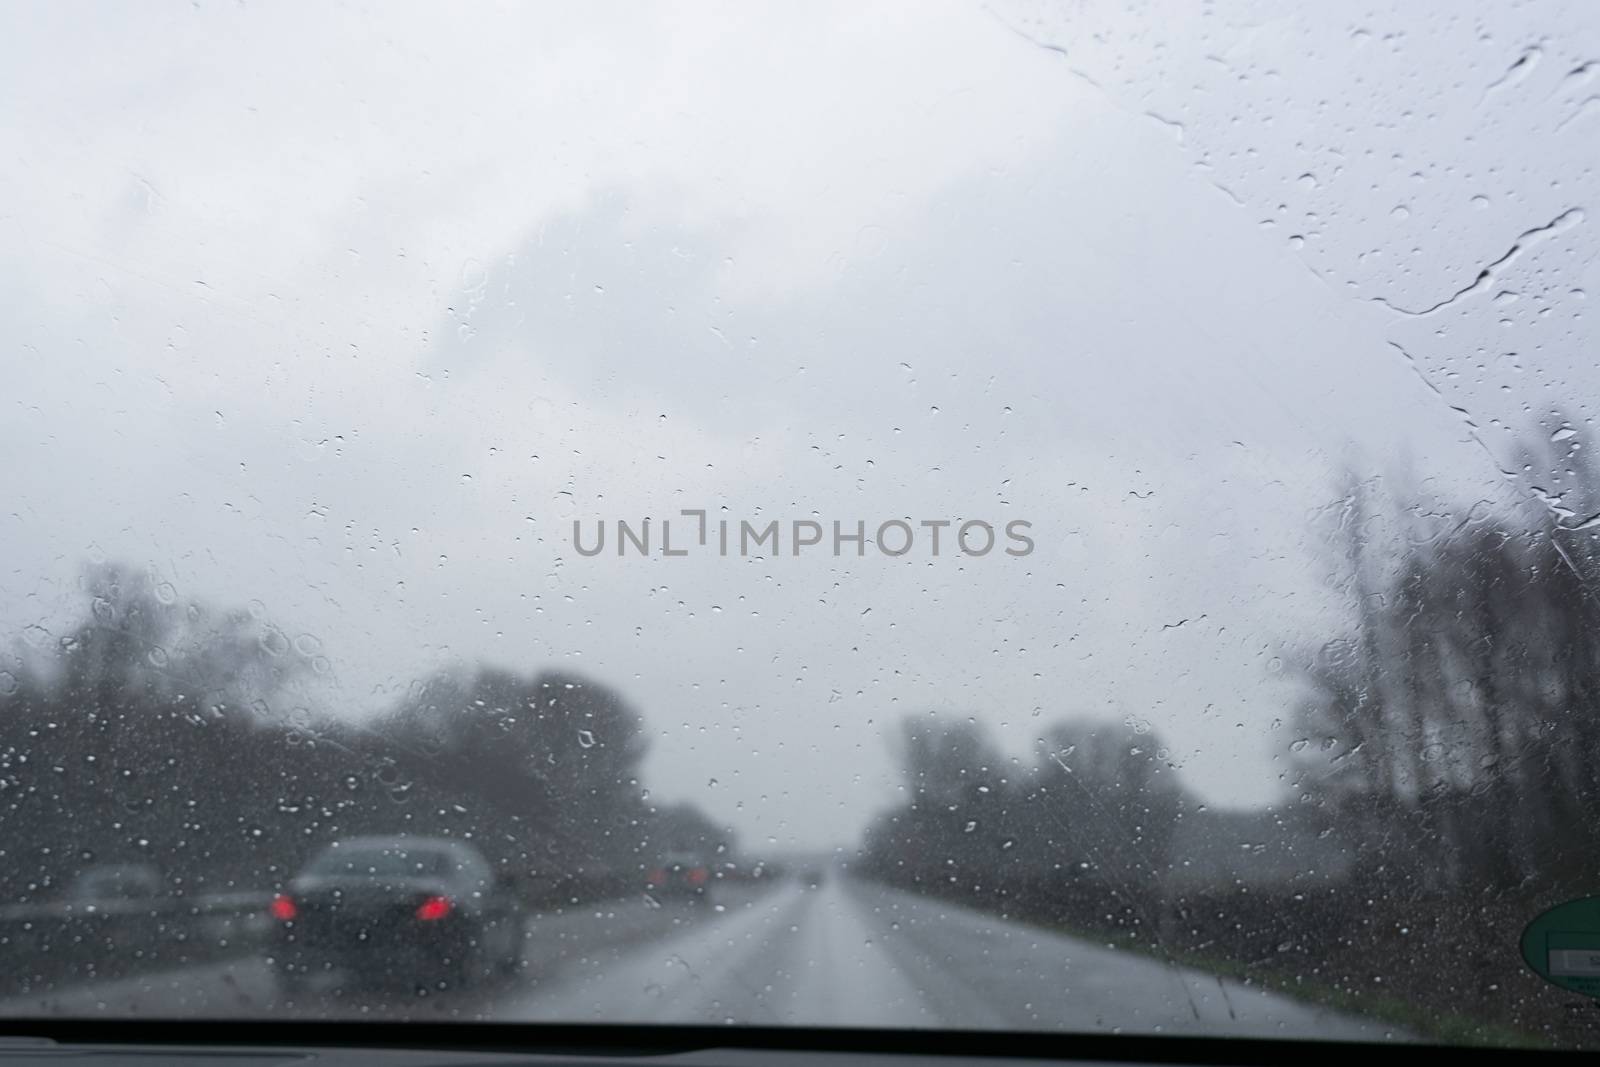 German Autobahn, bad weather conditions     by JFsPic